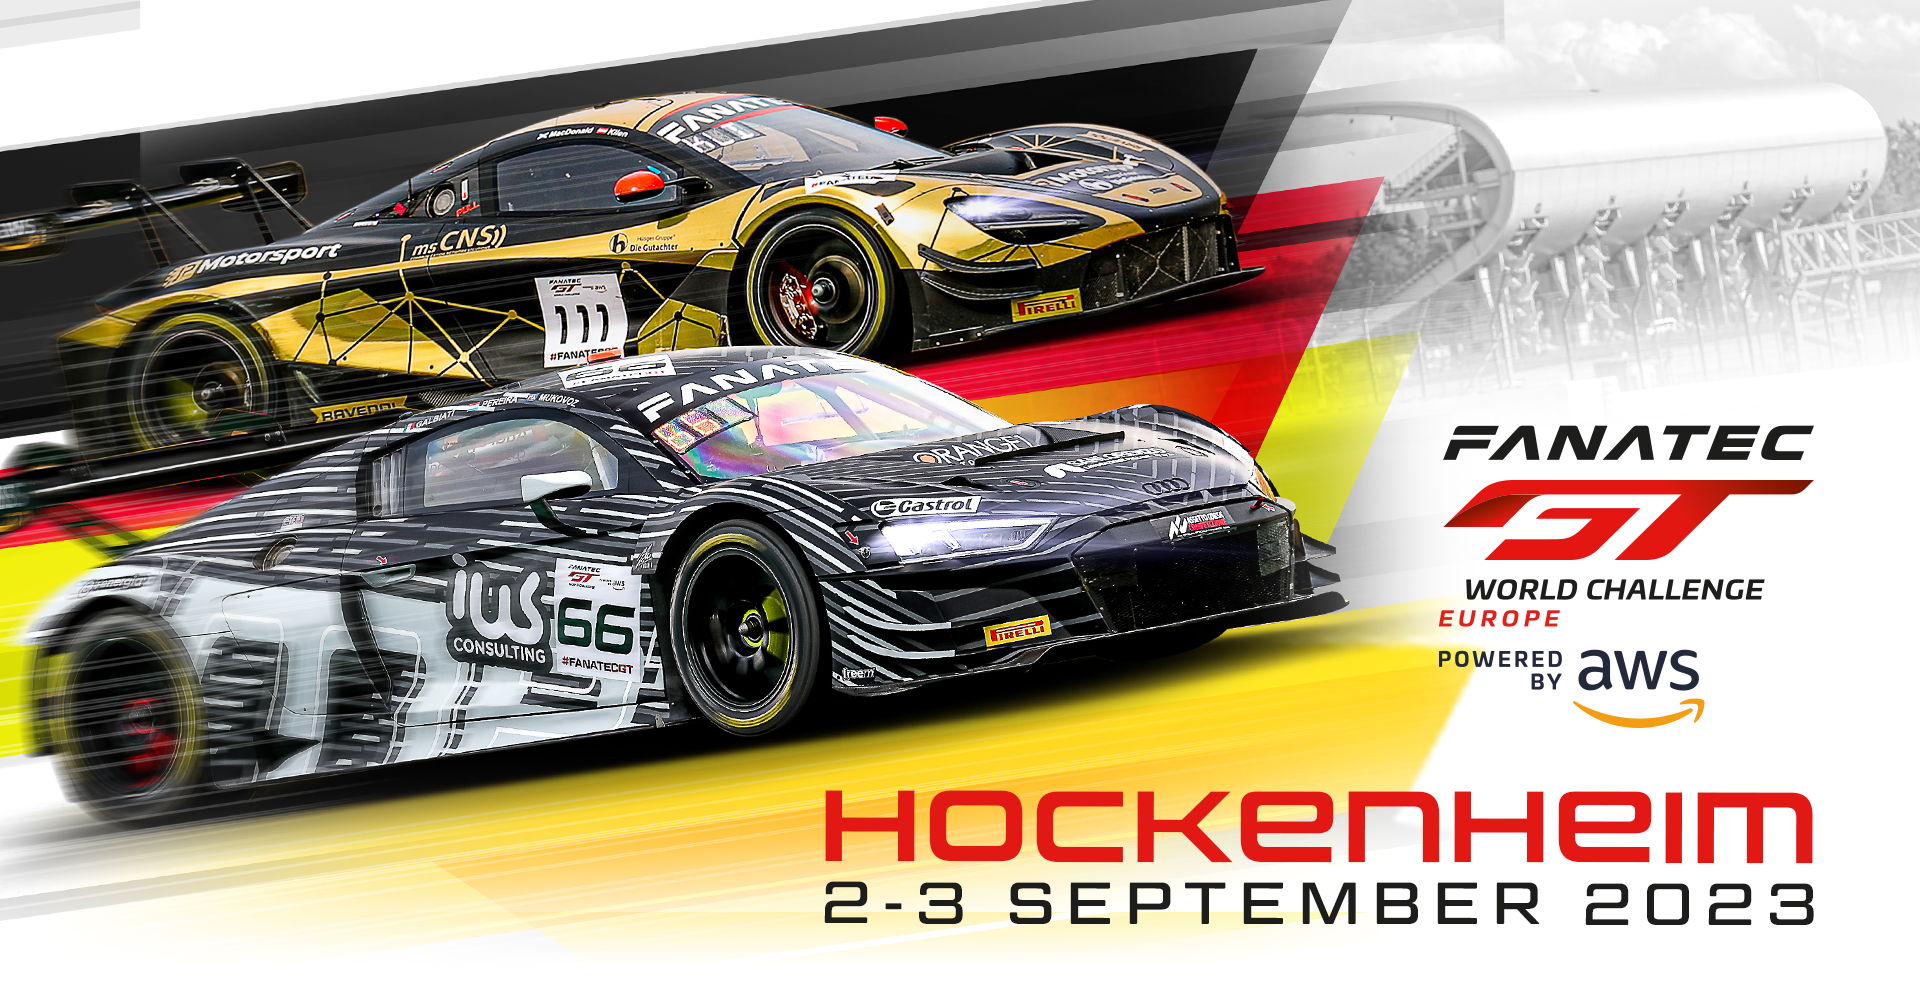 Fanatec GT Europe set for action-packed return to Hockenheim with stacked  41-car grid | Fanatec GT World Challenge Europe Powered by AWS